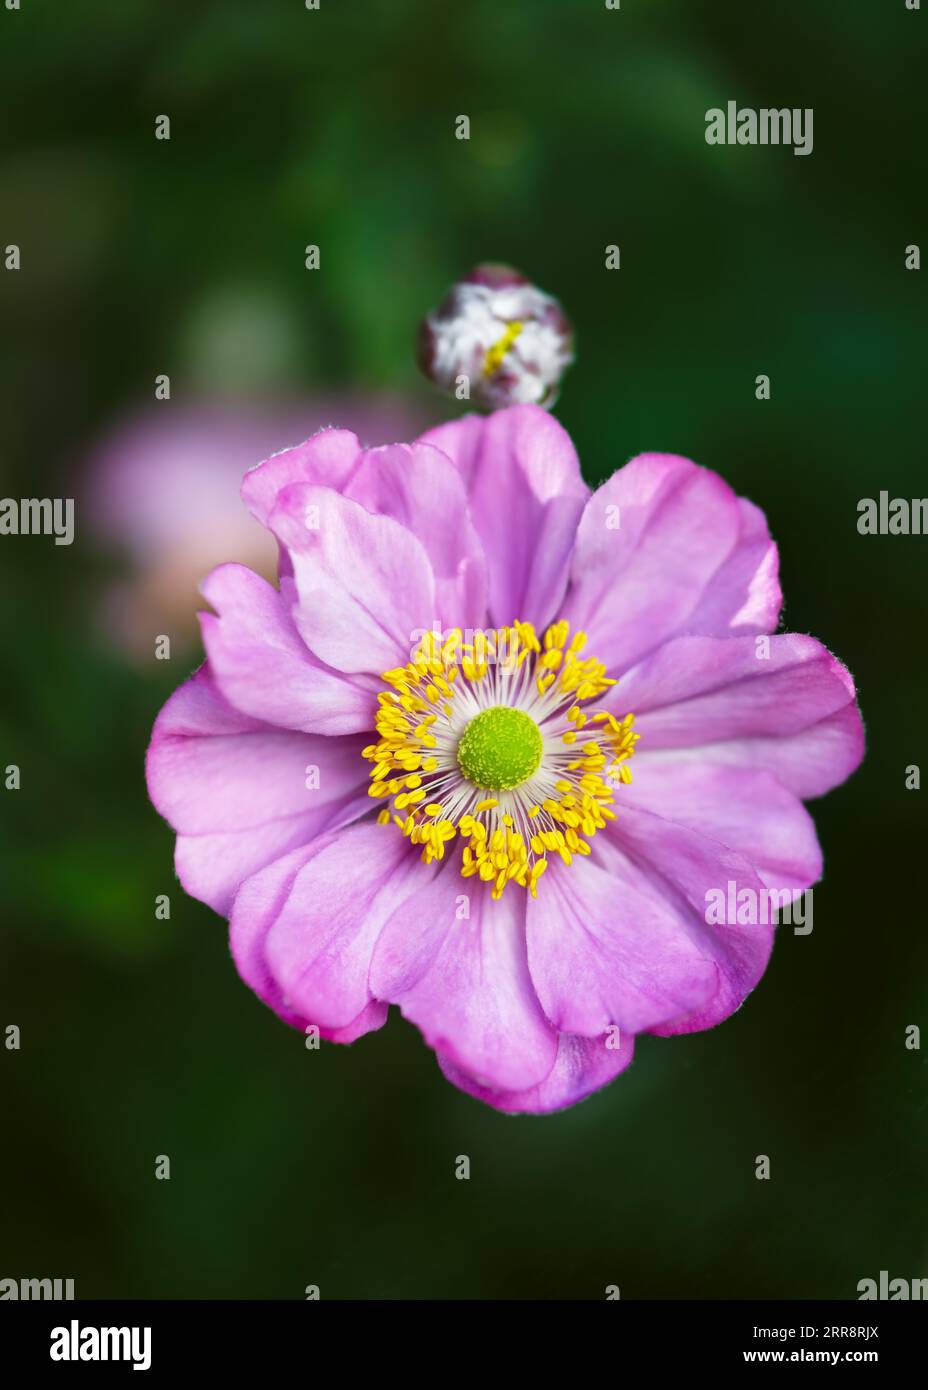 Top view of beutiful pink purple double flower of anemone japonica on blurred background. (Anemone Hupehensis) Selective focus. Stock Photo